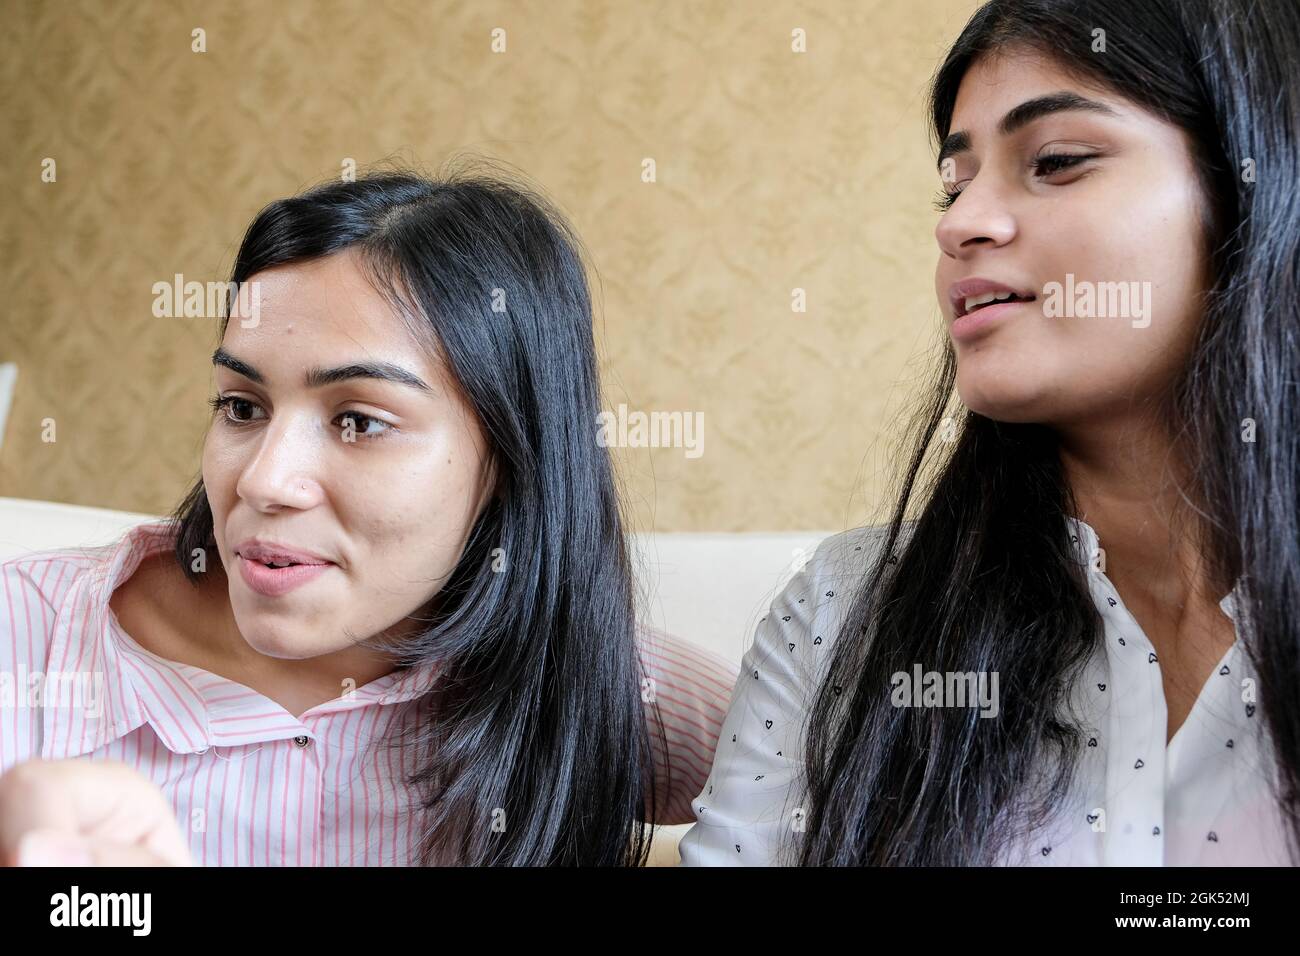 Closeup shot of two young girls looking at something and talking Stock Photo